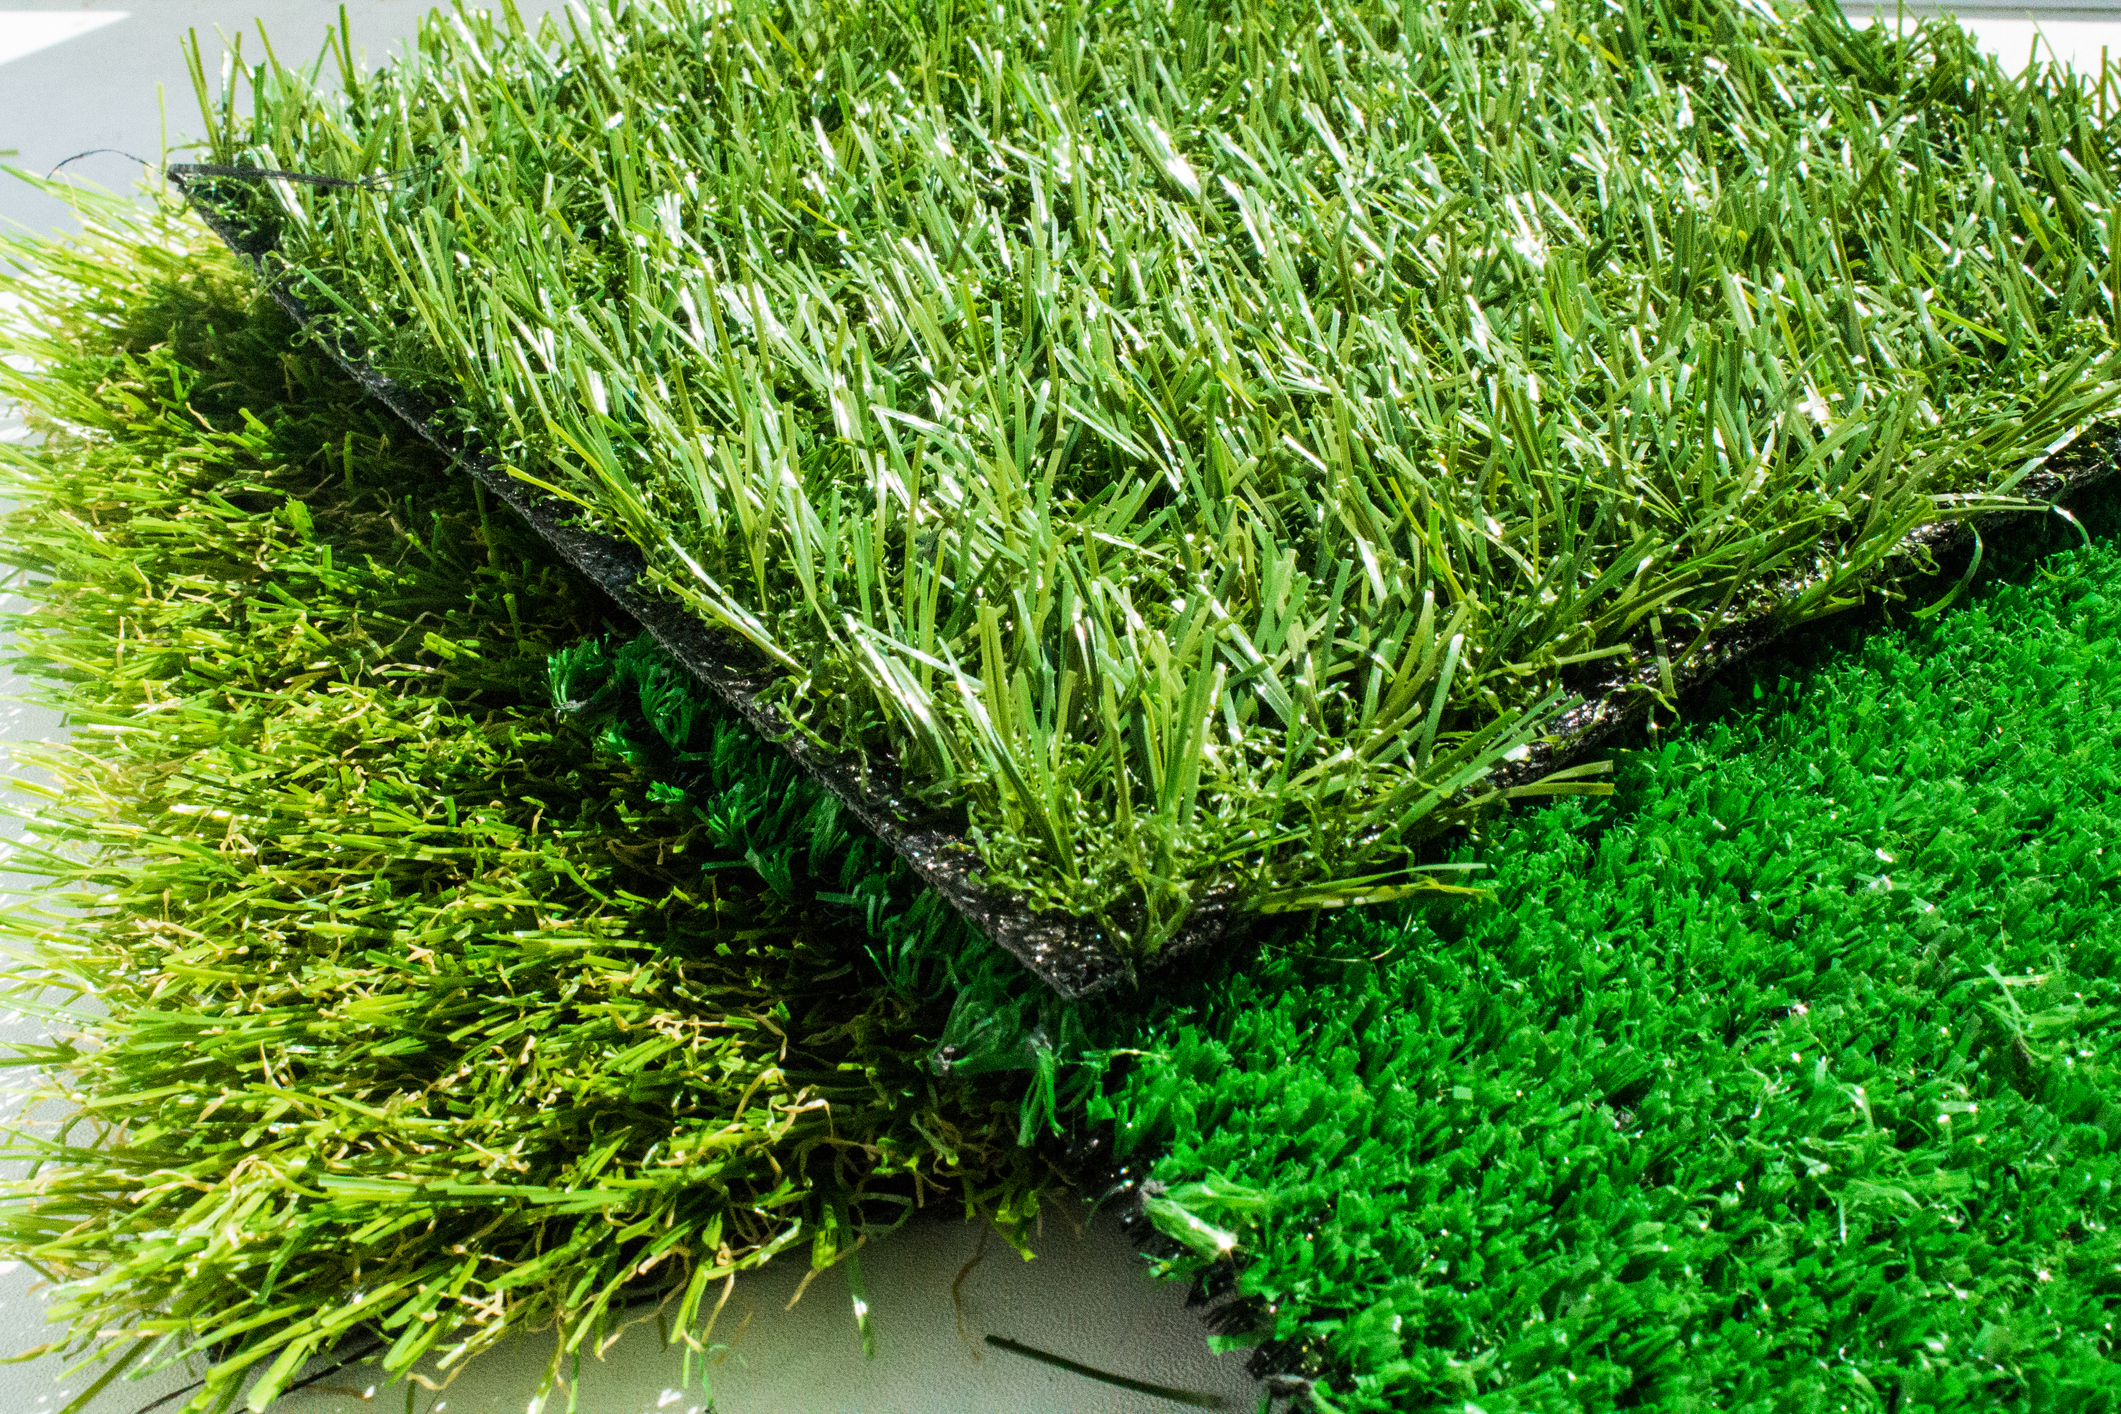 A close view of synthetic turf products.